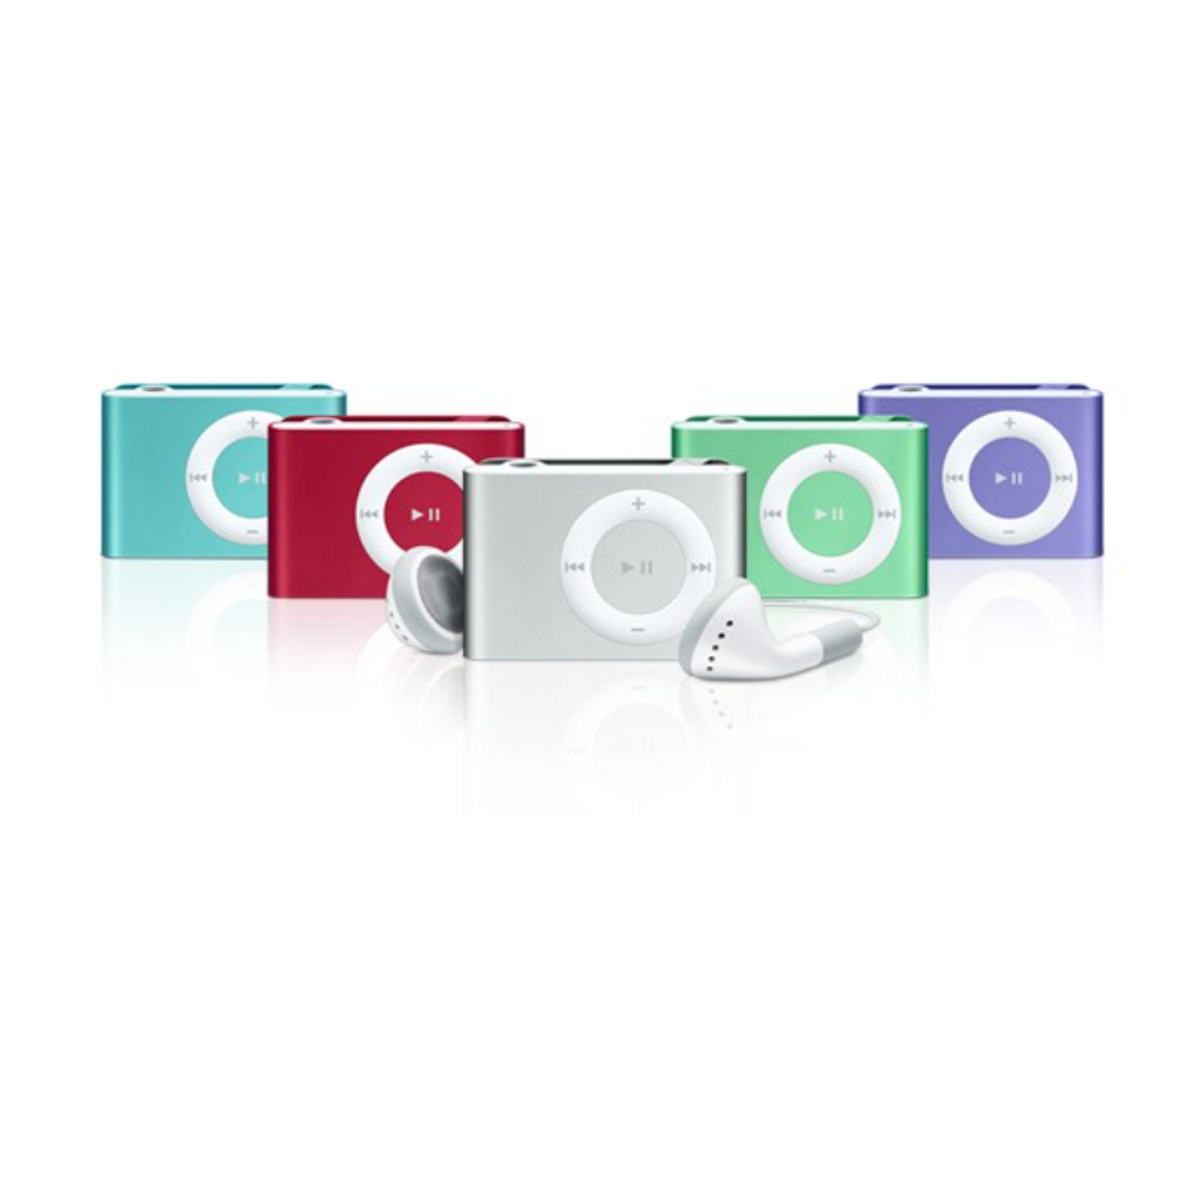 ​What Listening To Music On An iPod Shuffle Taught Me